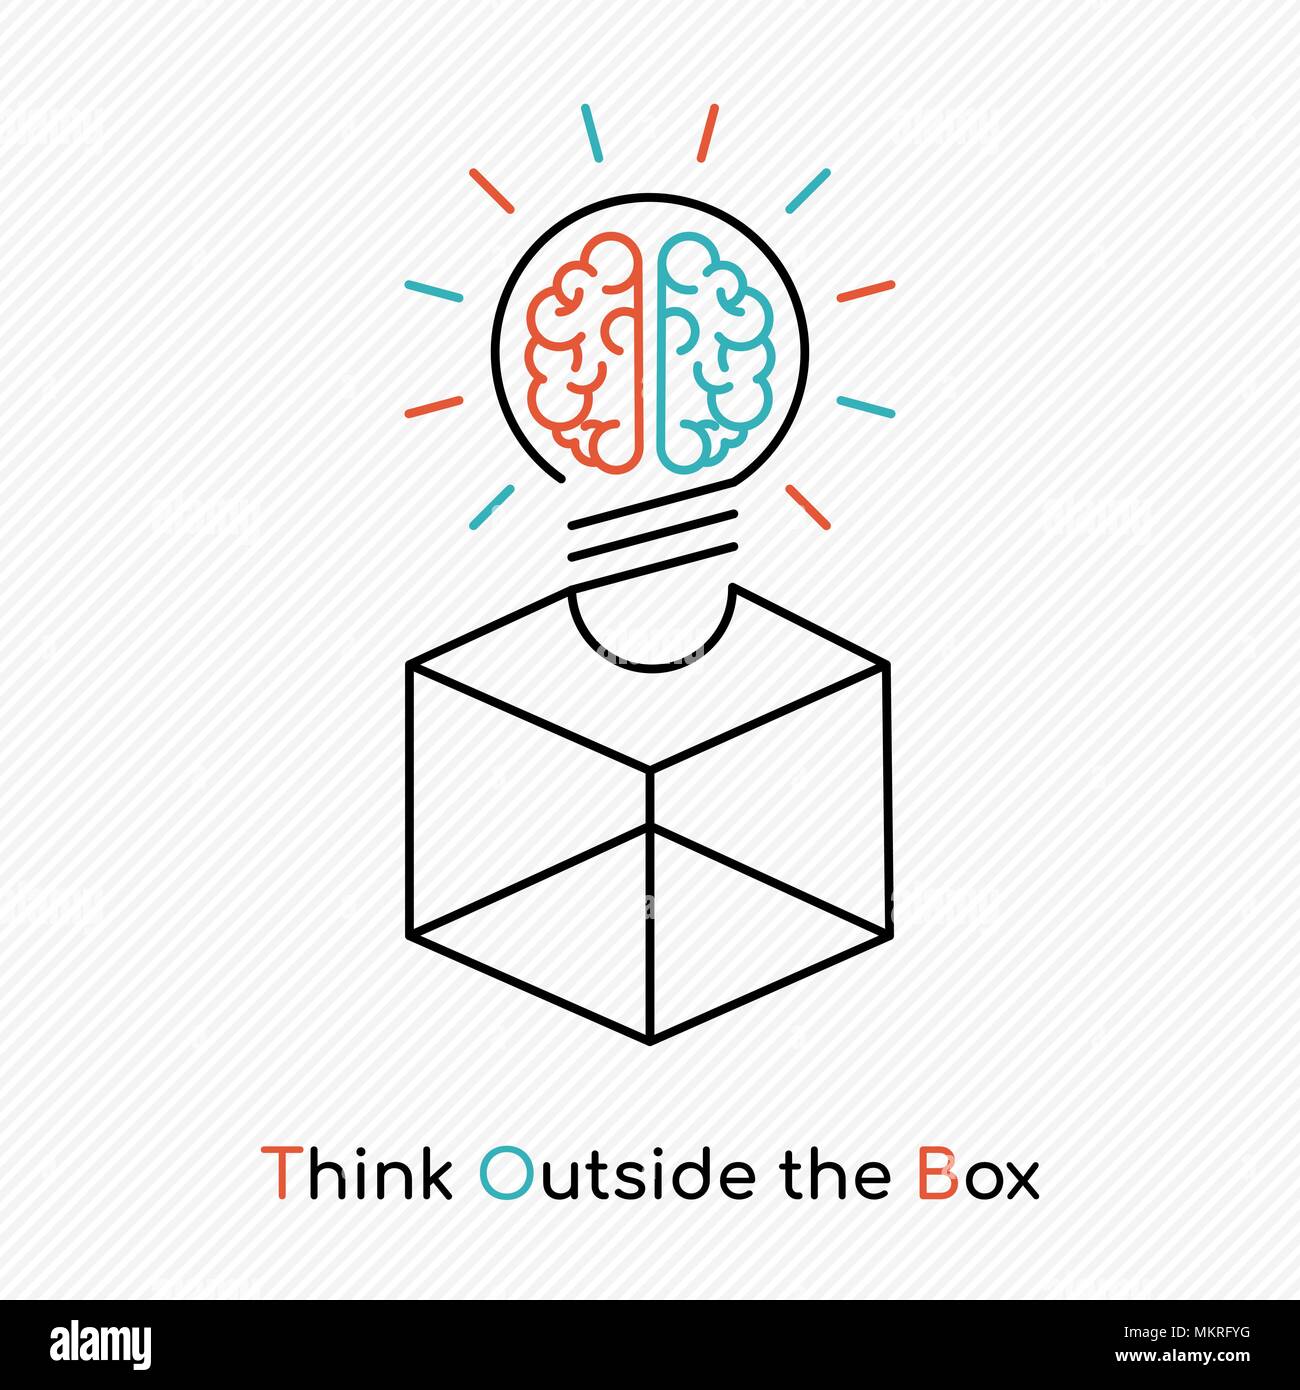 Think outside the box, human brain light bulb concept illustration in simple outline style for business solution or creative thinking. EPS10 vector. Stock Vector